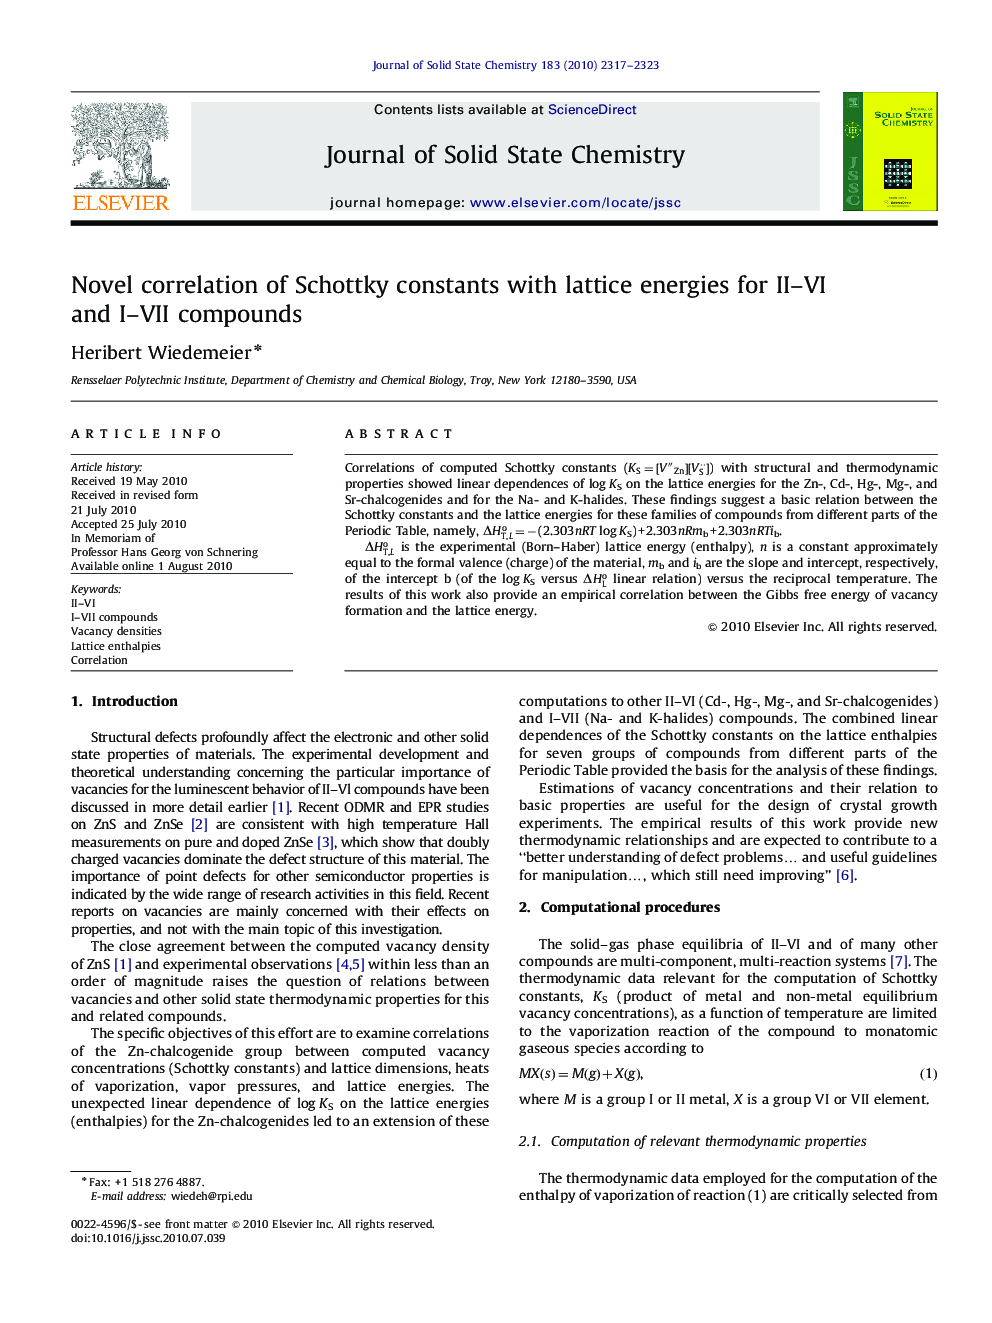 Novel correlation of Schottky constants with lattice energies for II-VI and I-VII compounds